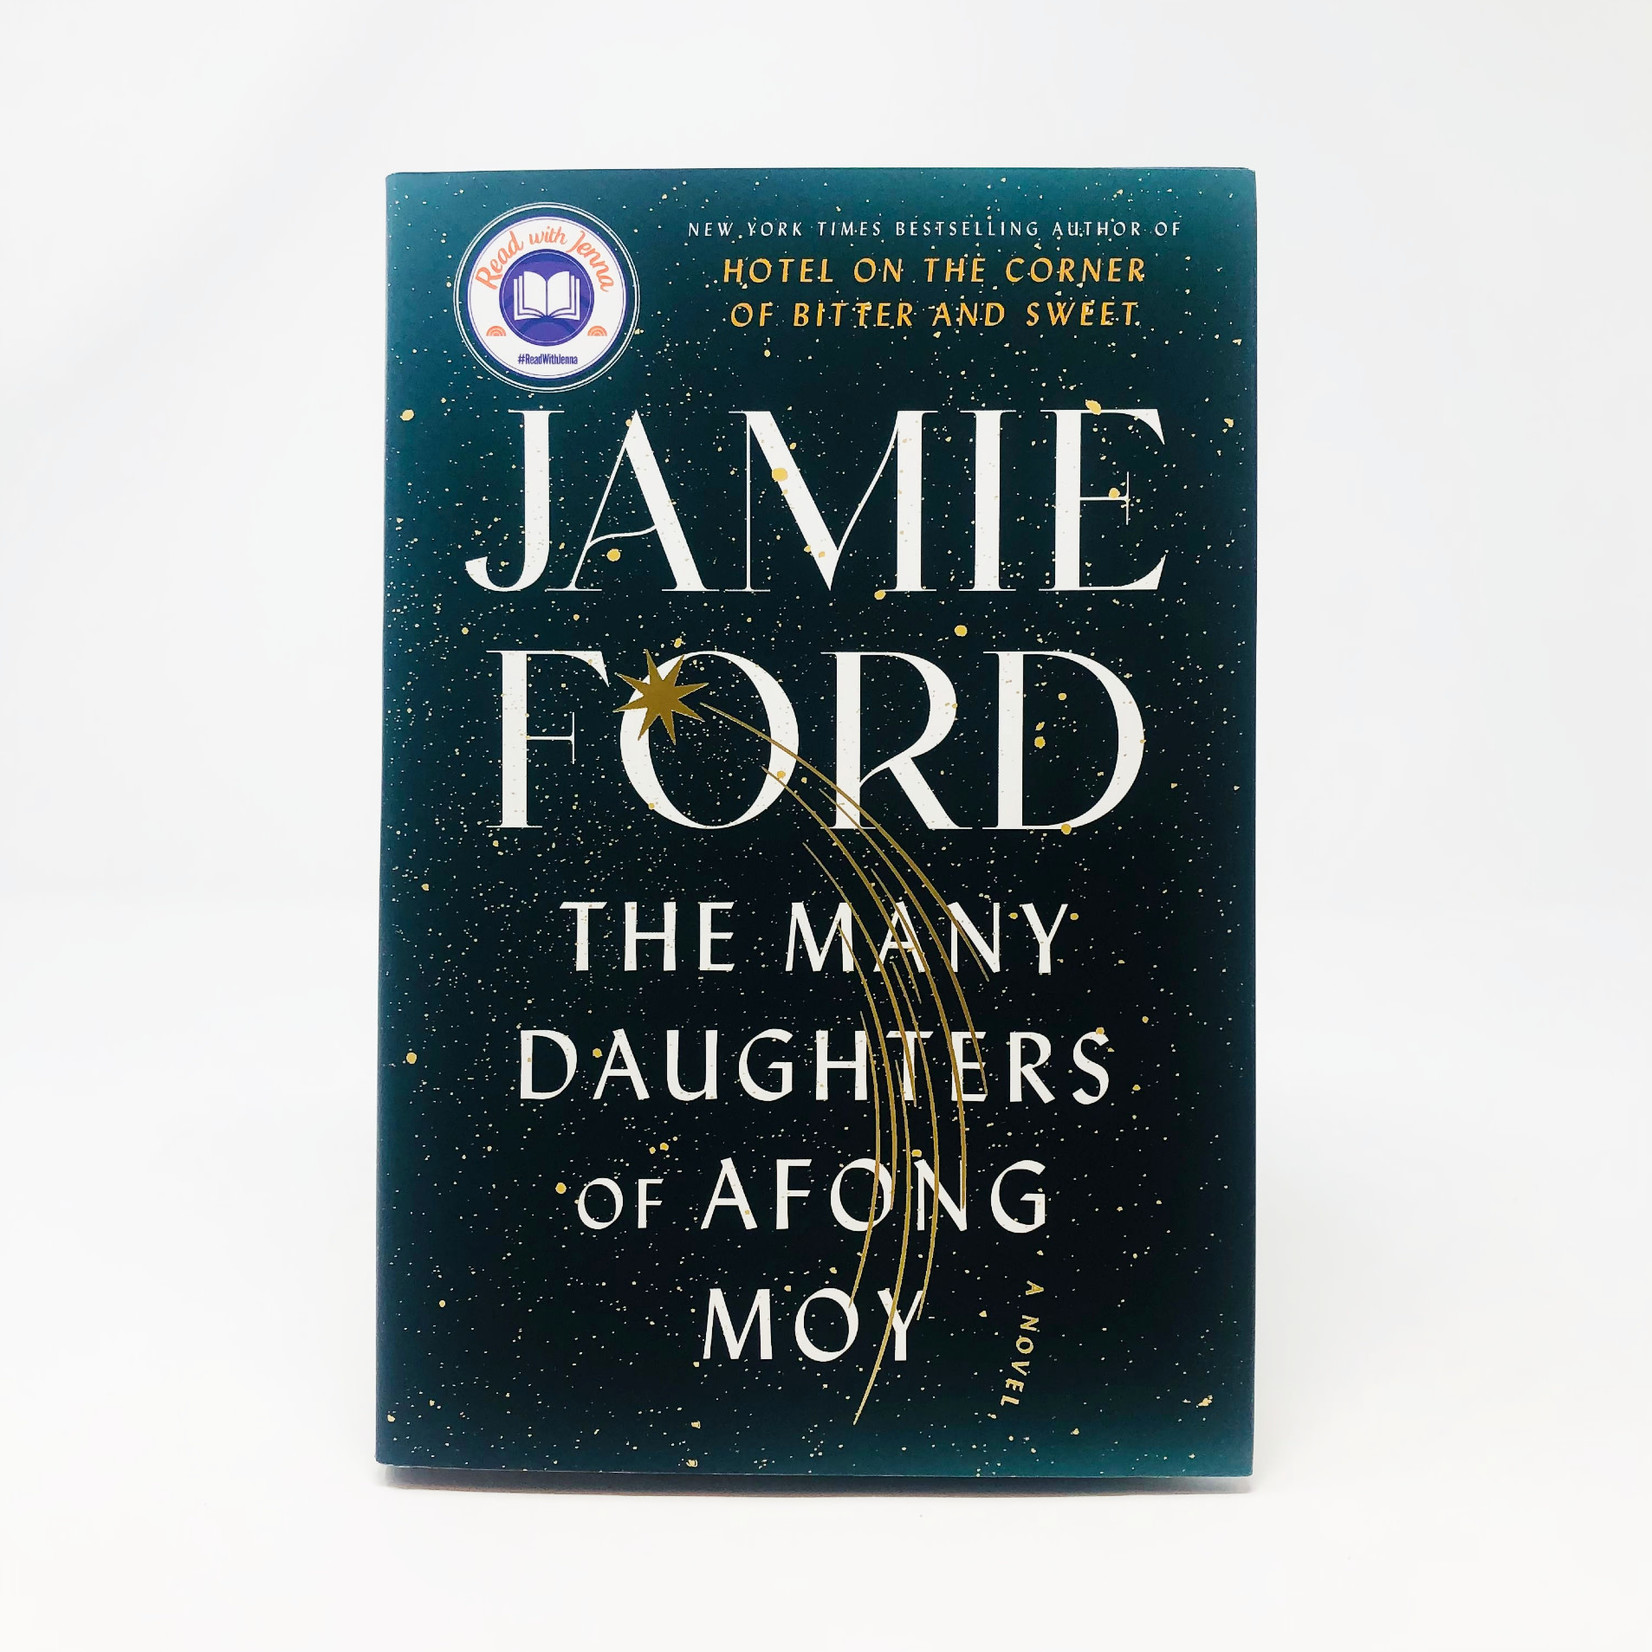 THE MANY DAUGHTERS OF AFONG MOY